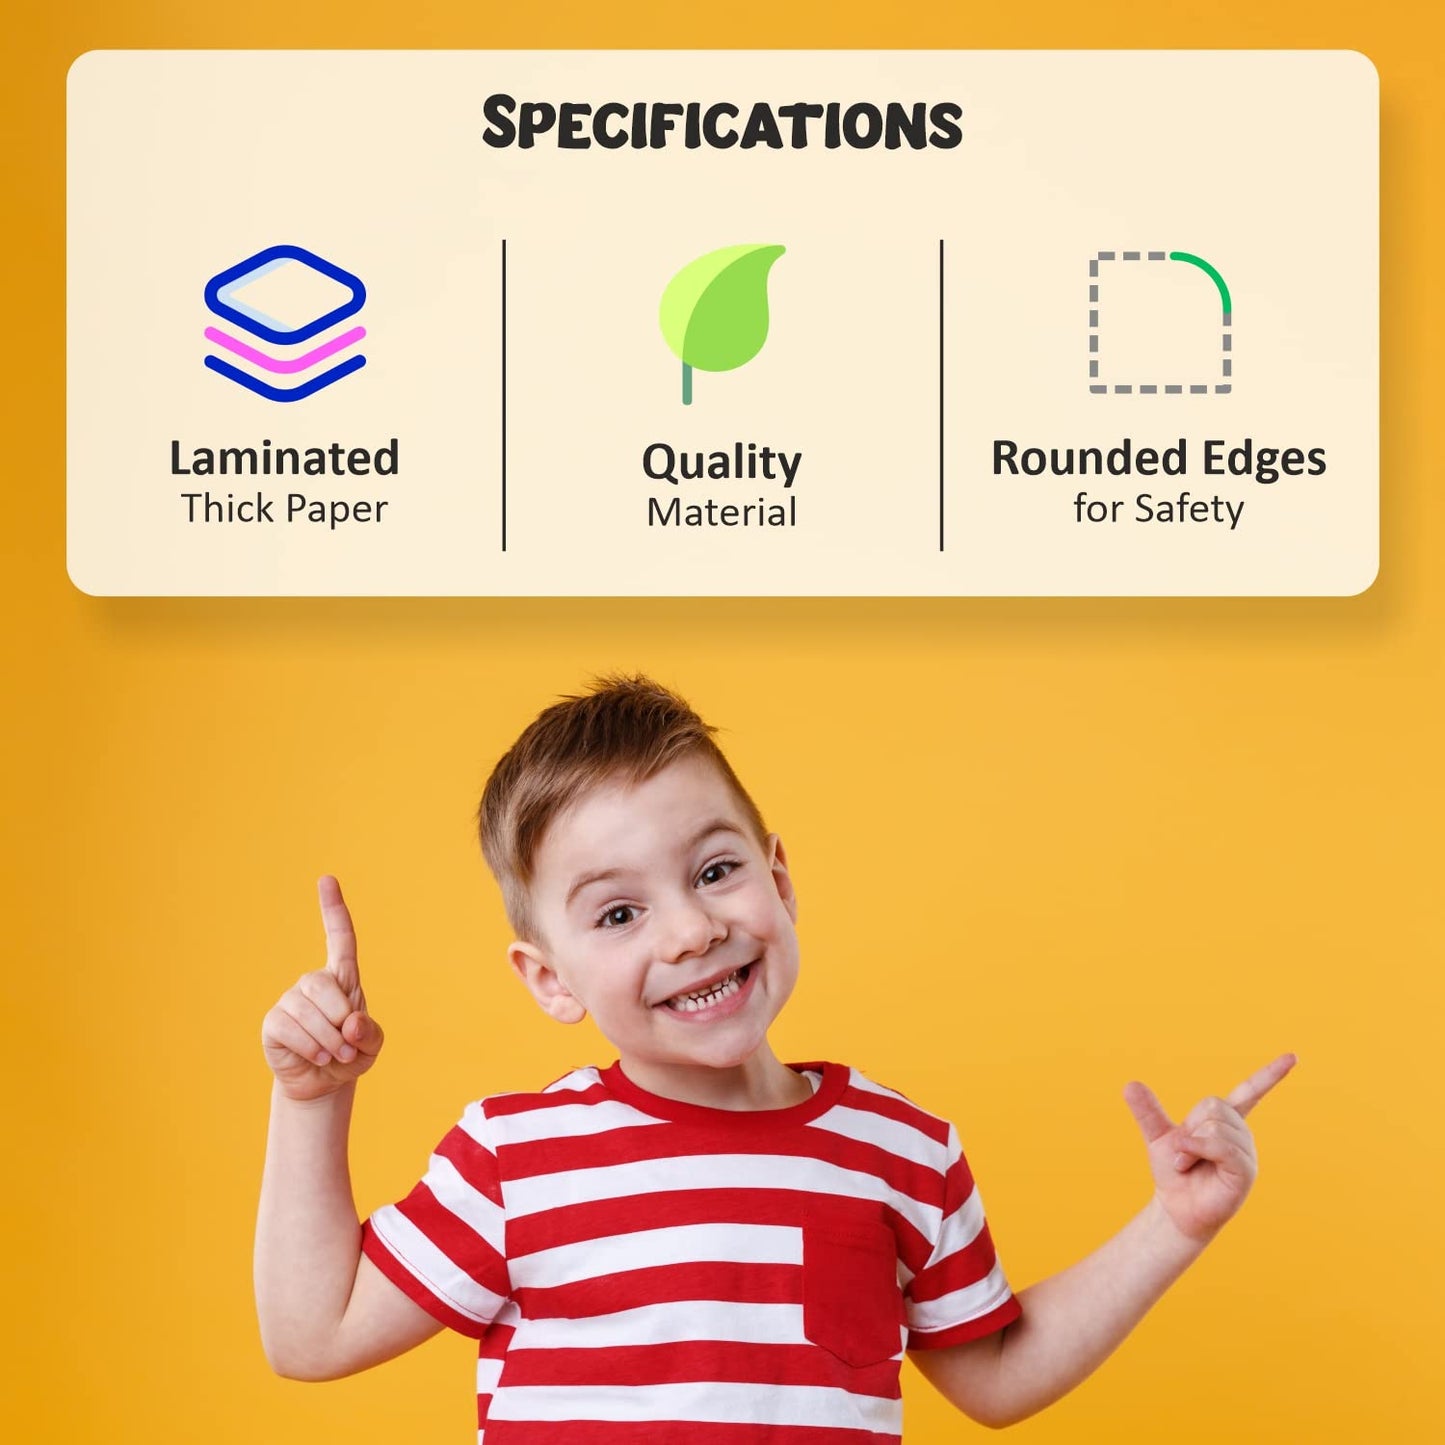 HoloKitab Augmented Reality Vegetable Flashcards Kit: 20 Laminated Cards with Real Illustrations | Ideal for Kindergarten